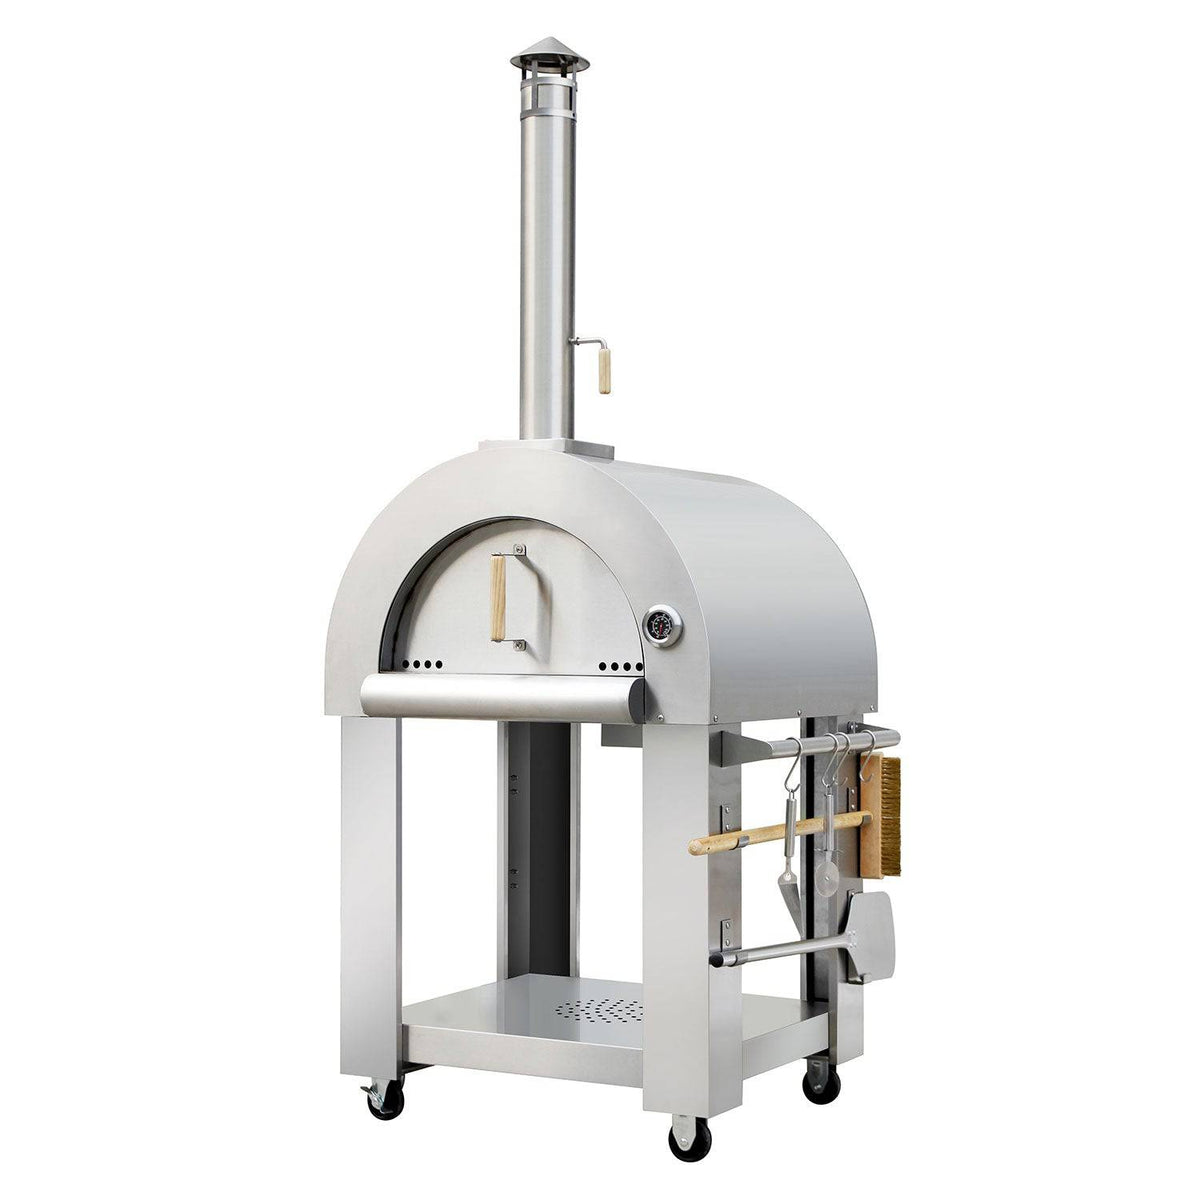 Fobest Kitchen Stainless Steel Freestanding Wood Burning Outdoor Pizza Oven - Pizza Oven-Fobest Appliance